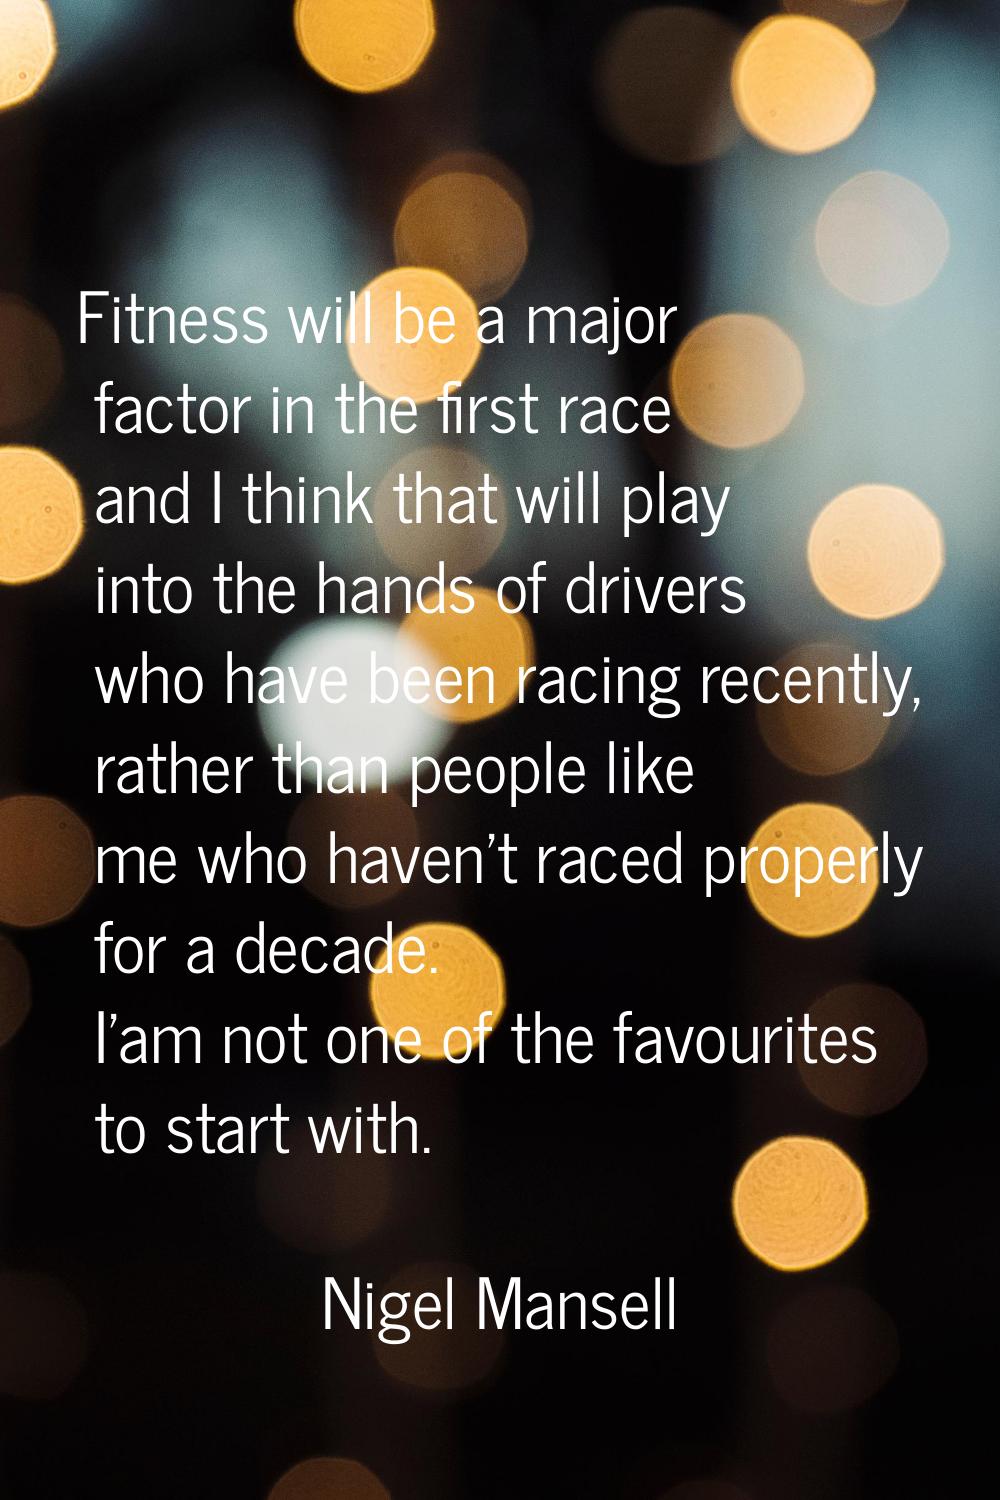 Fitness will be a major factor in the first race and I think that will play into the hands of drive